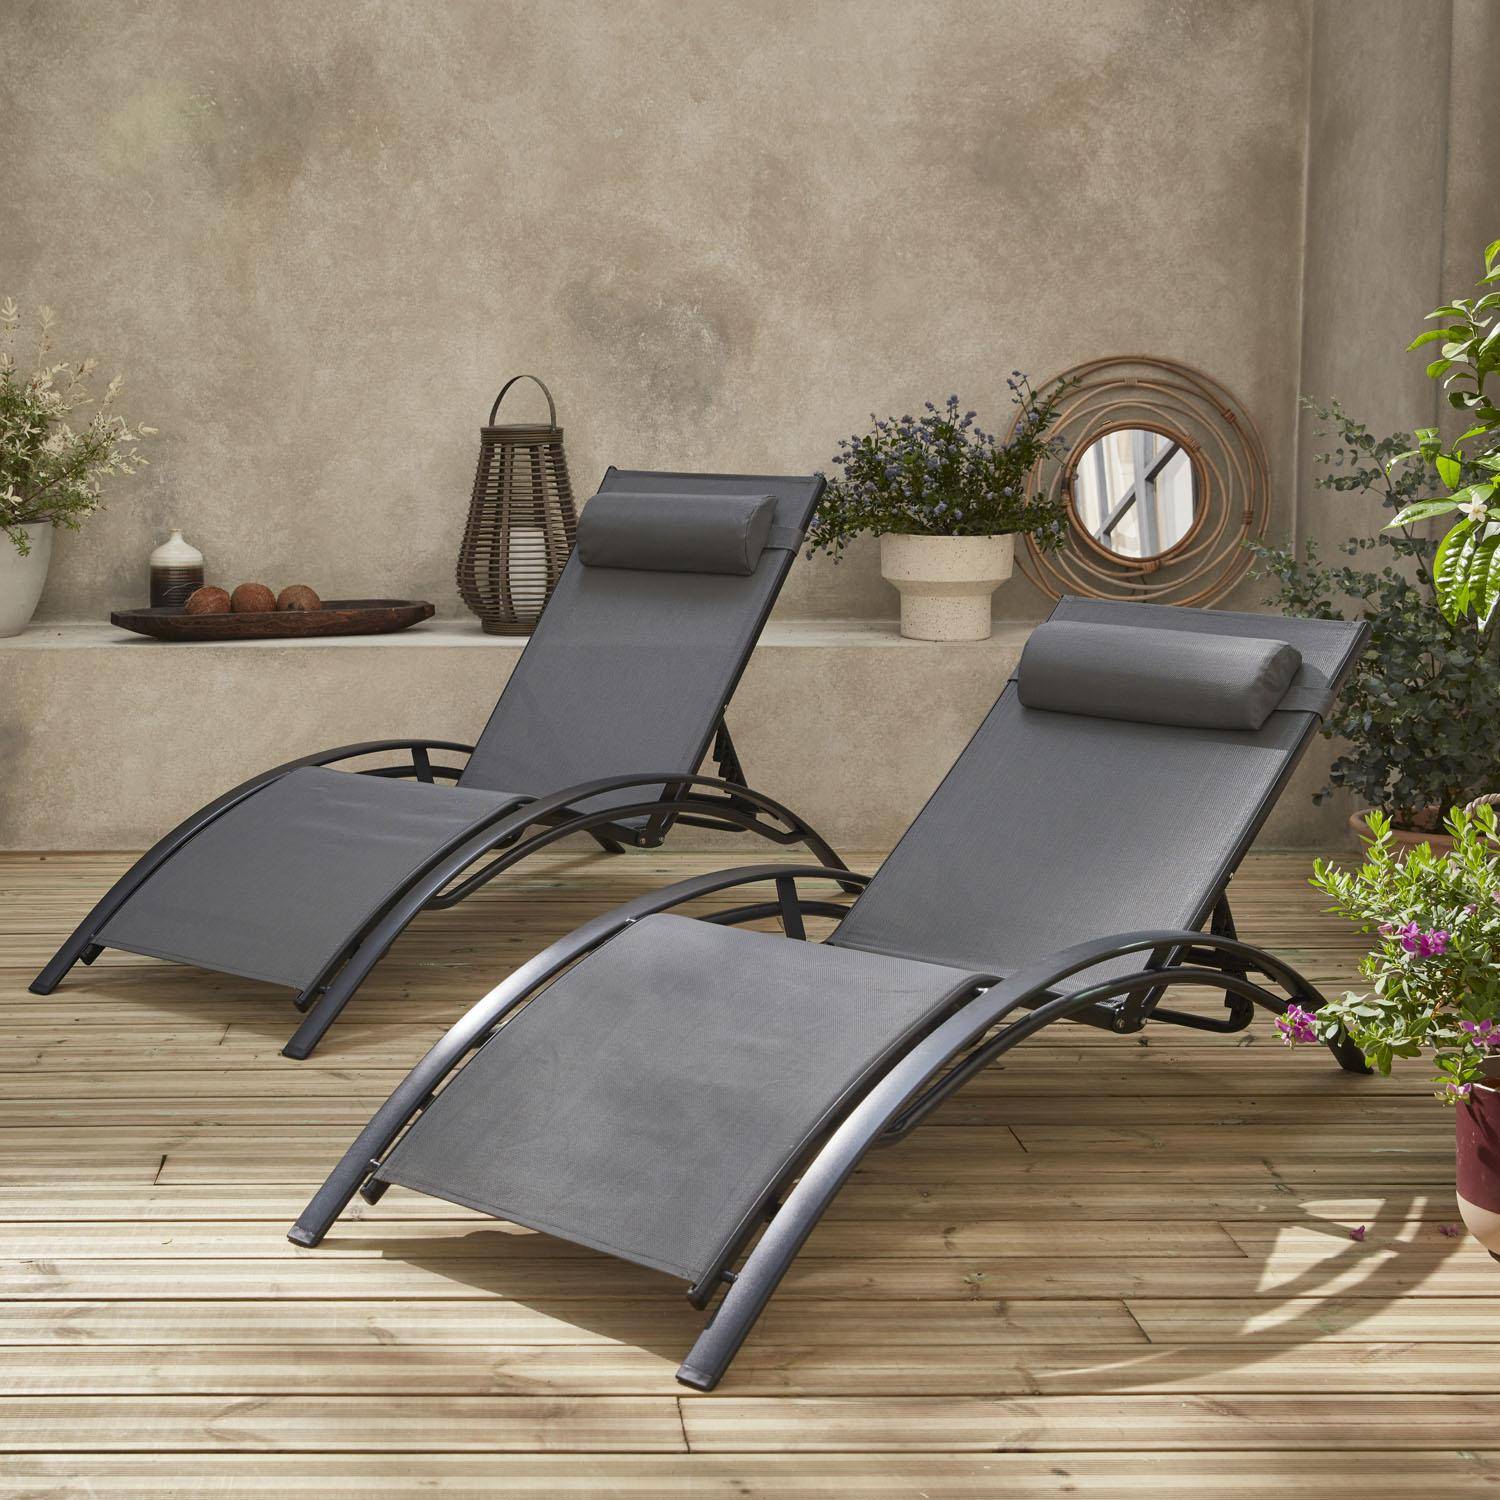 Pair of aluminium and textilene sun loungers, 4 reclining positions, headrest included, stackable - Louisa - Anthracite frame, Grey textilene Photo1